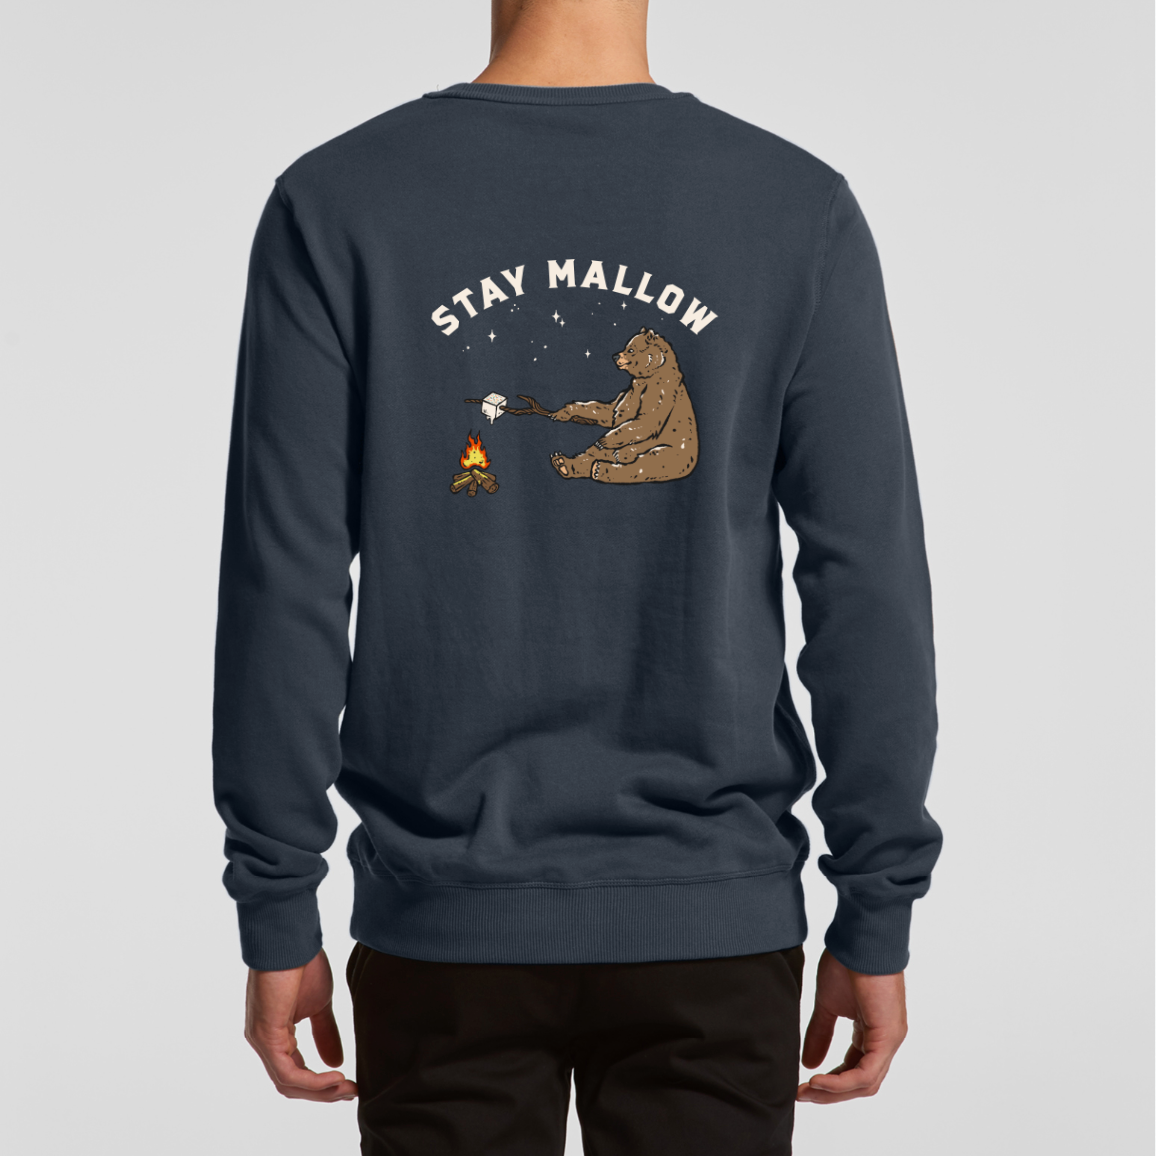 Stay Mallow Mens Sweater